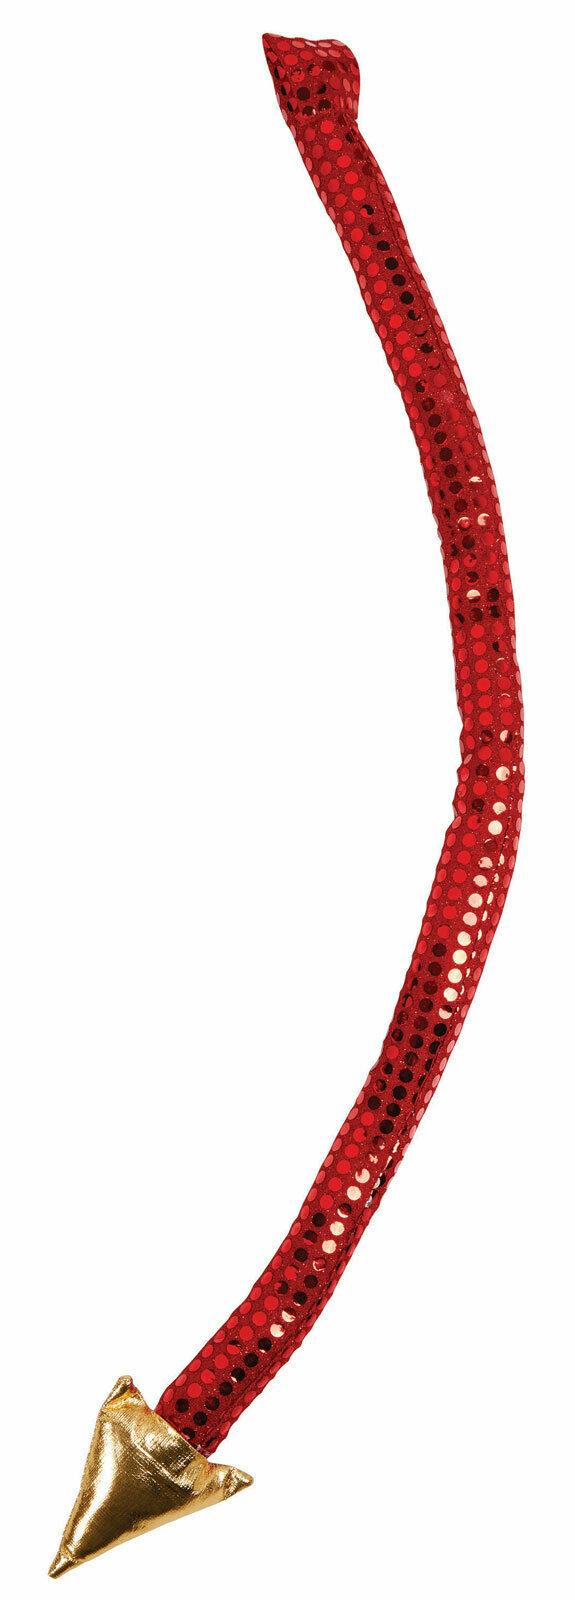 Red Sequin Devil Tail with Gold Tip Halloween Fancy Dress Costume Accessory - Labreeze